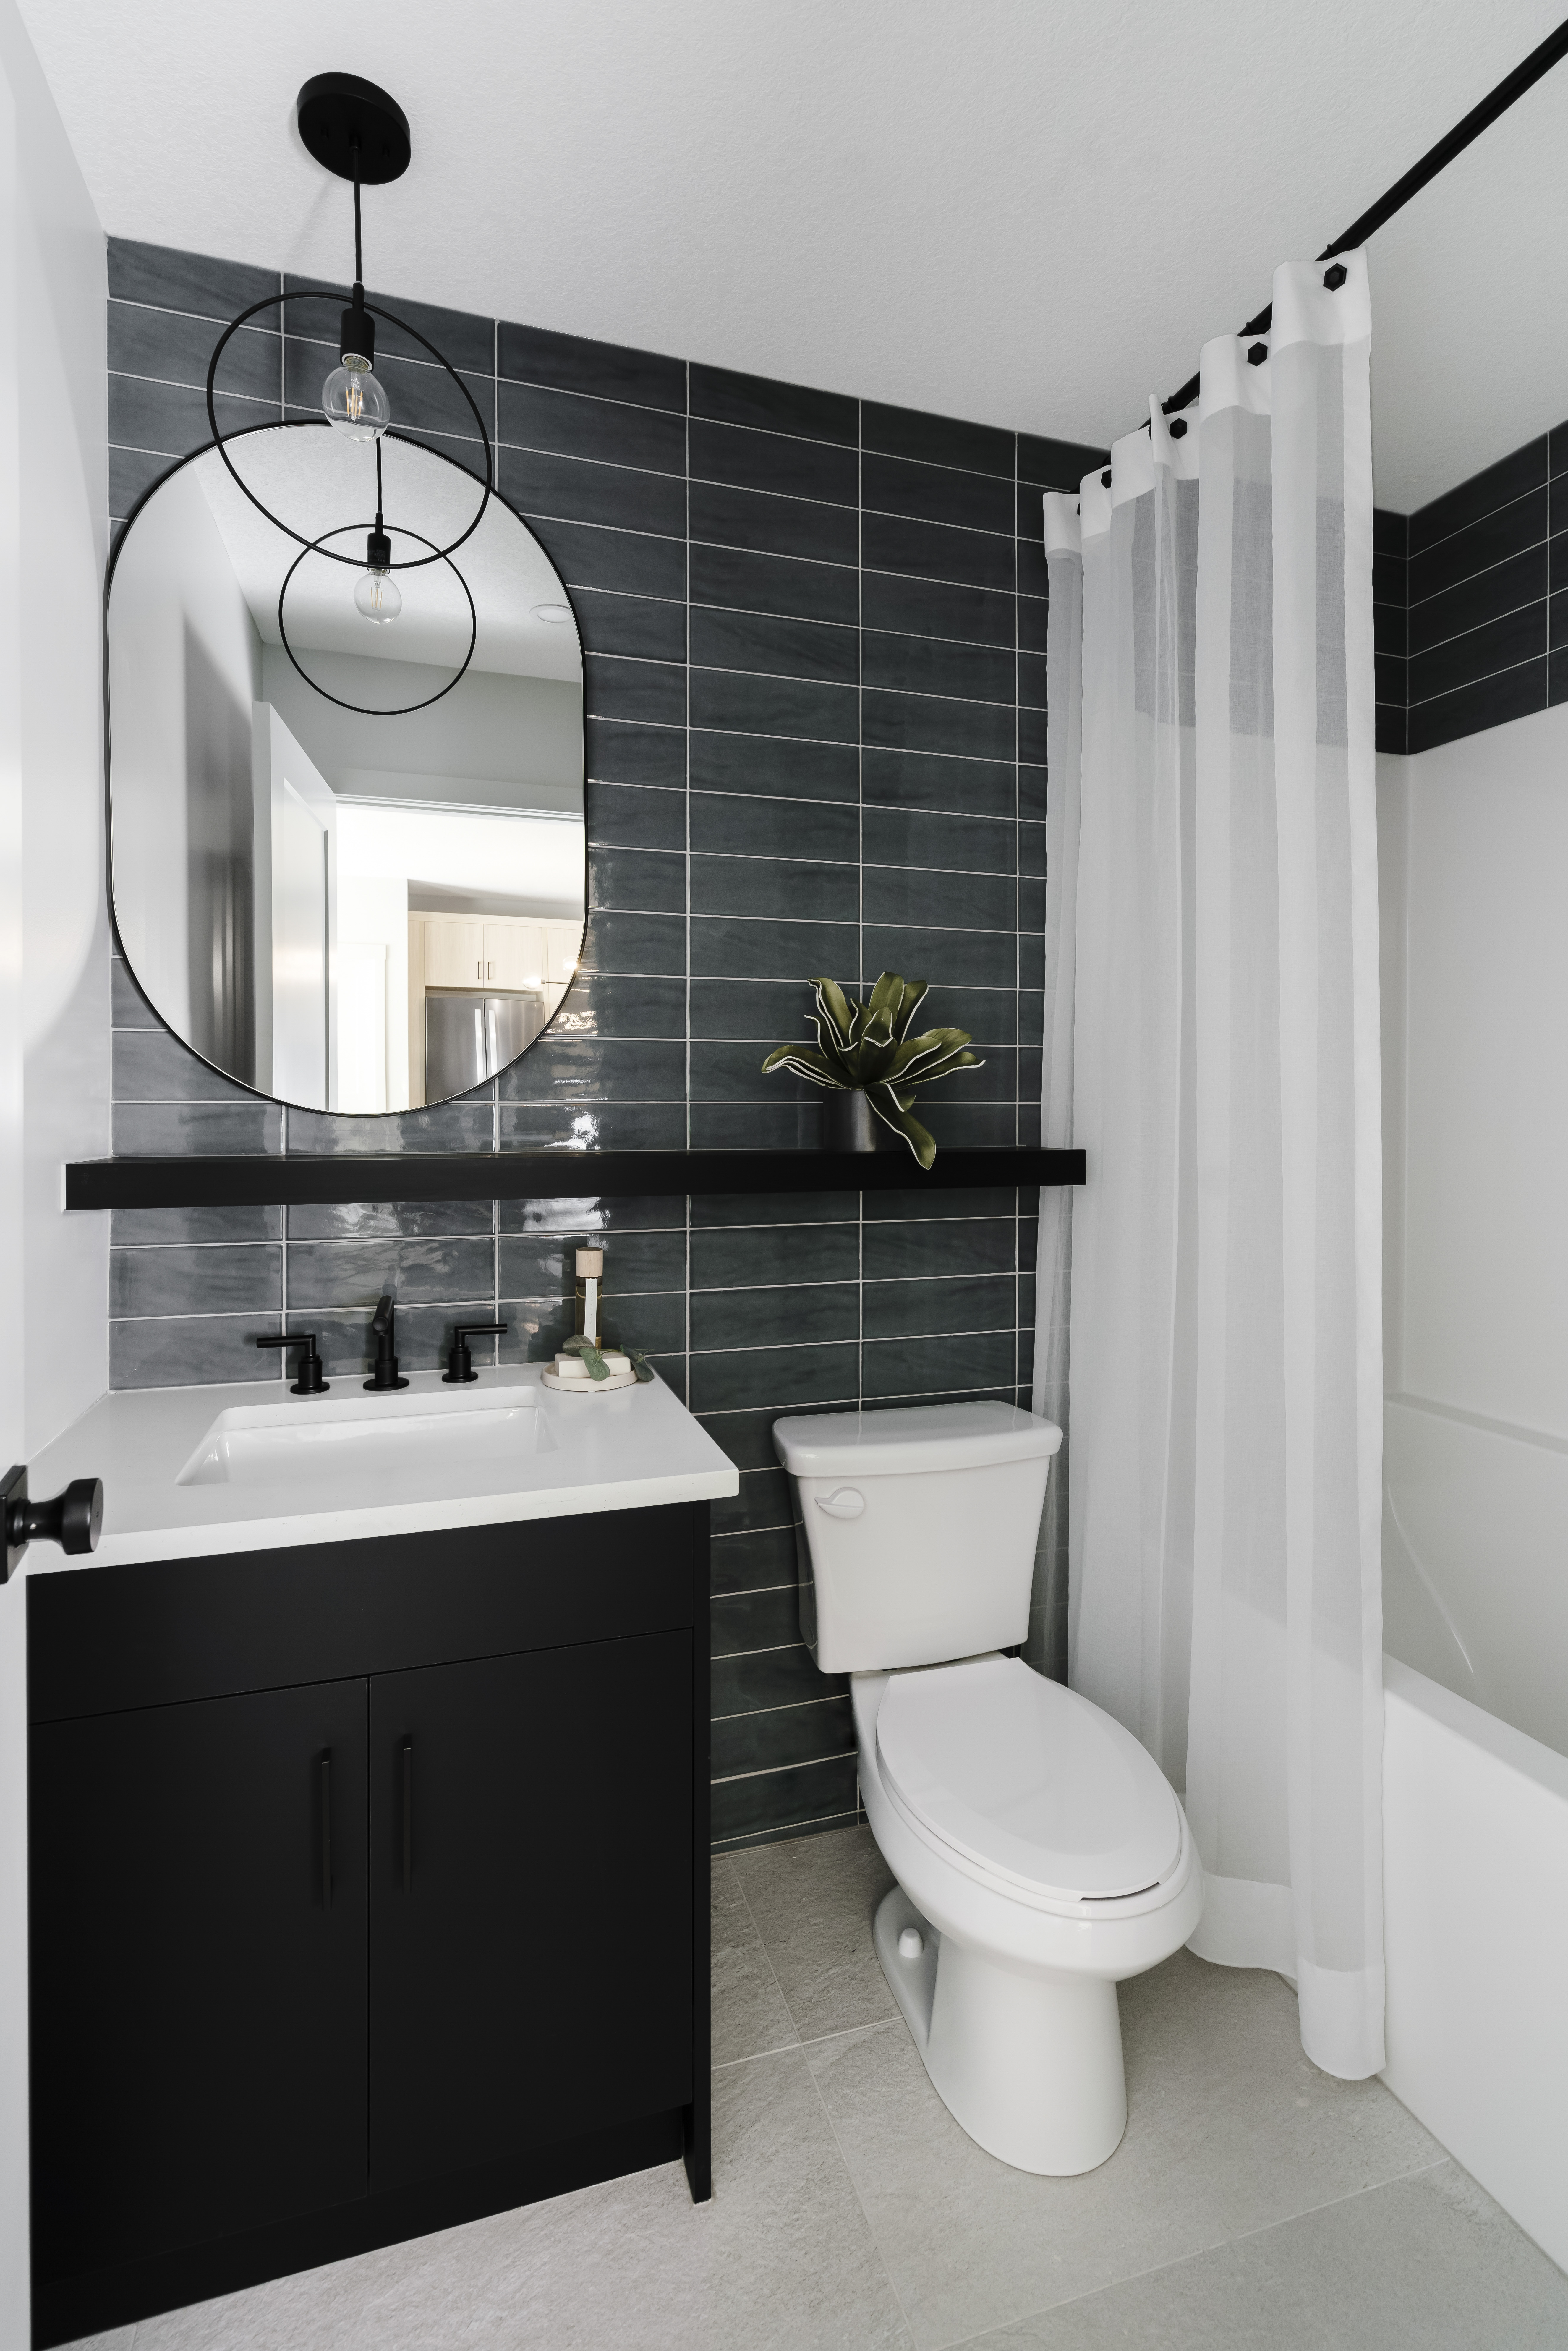 Bathroom with floating shelf and black vanity with floor to ceiling subway tile.